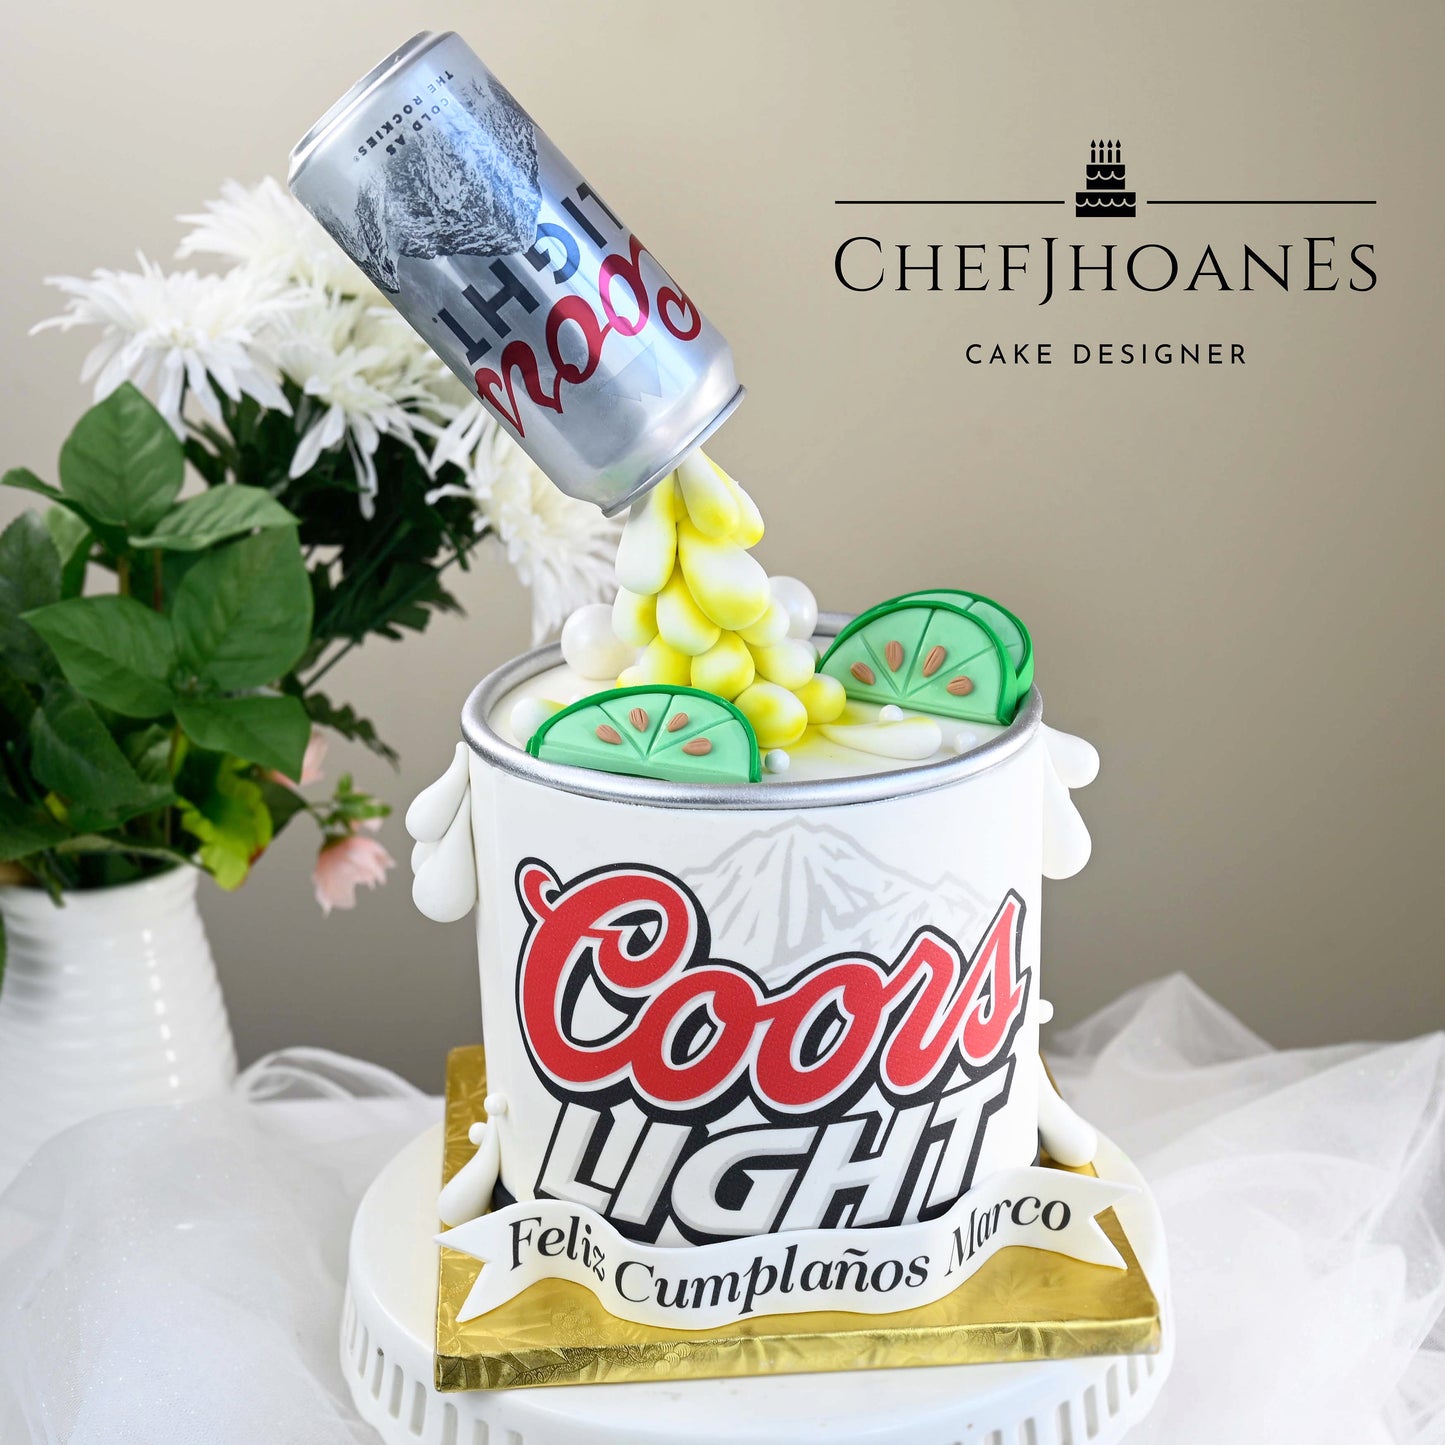 Coors light cake. Feed 15 people.